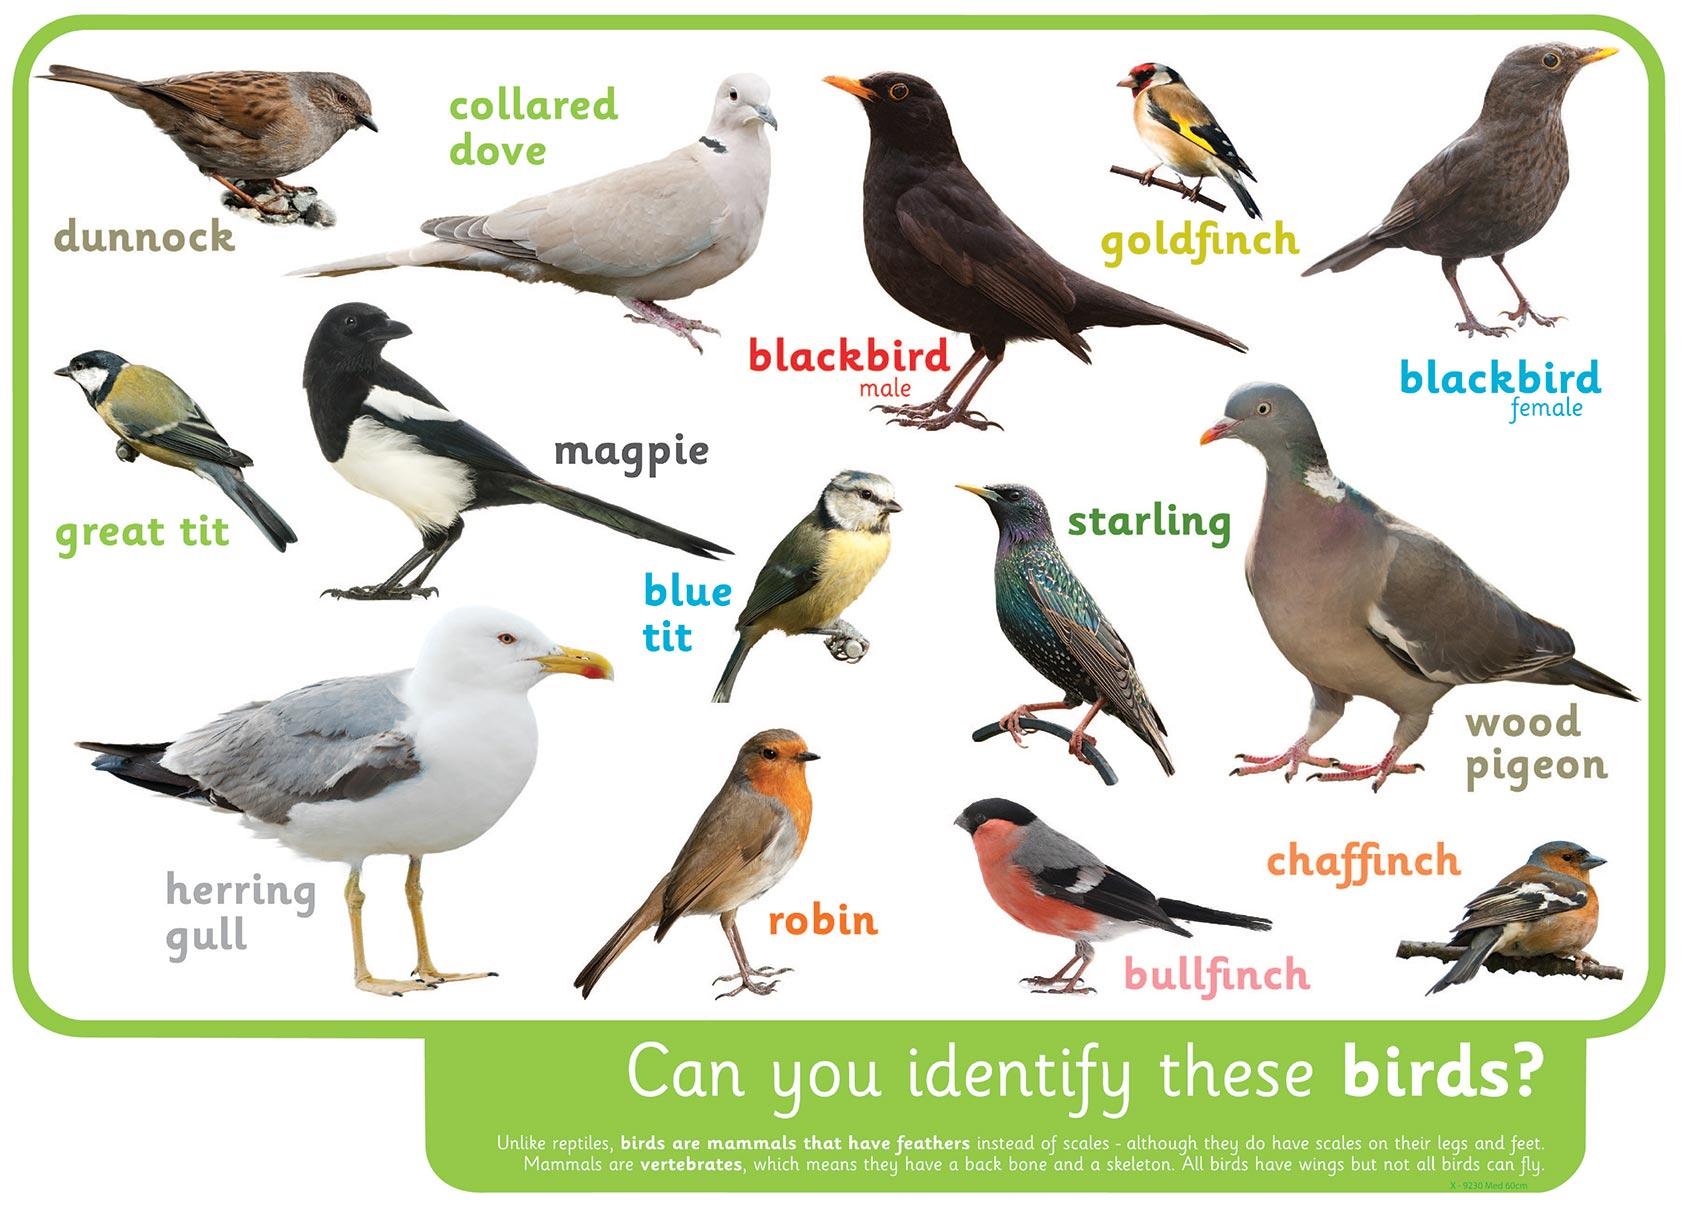 Can you identify these birds?